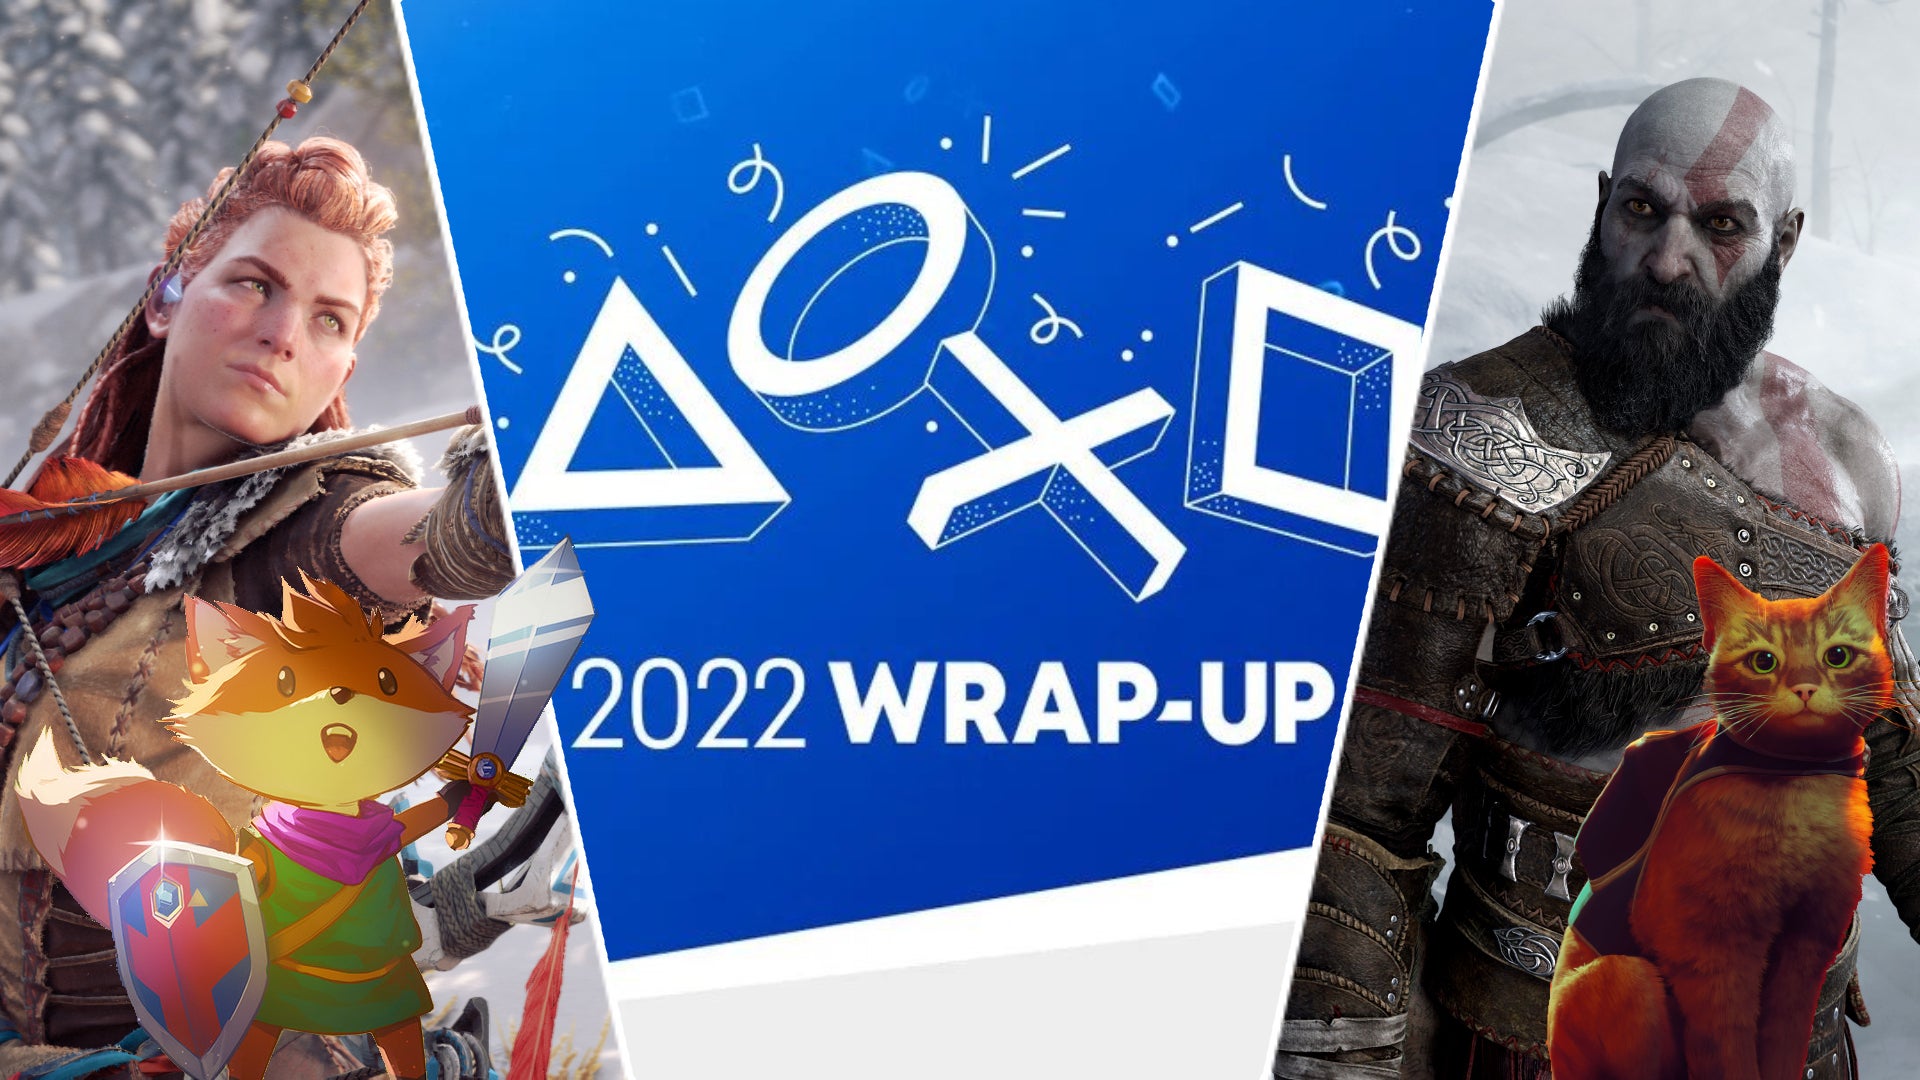 Your PlayStation 2022 Wrap-Up is now available, here’s how to get it